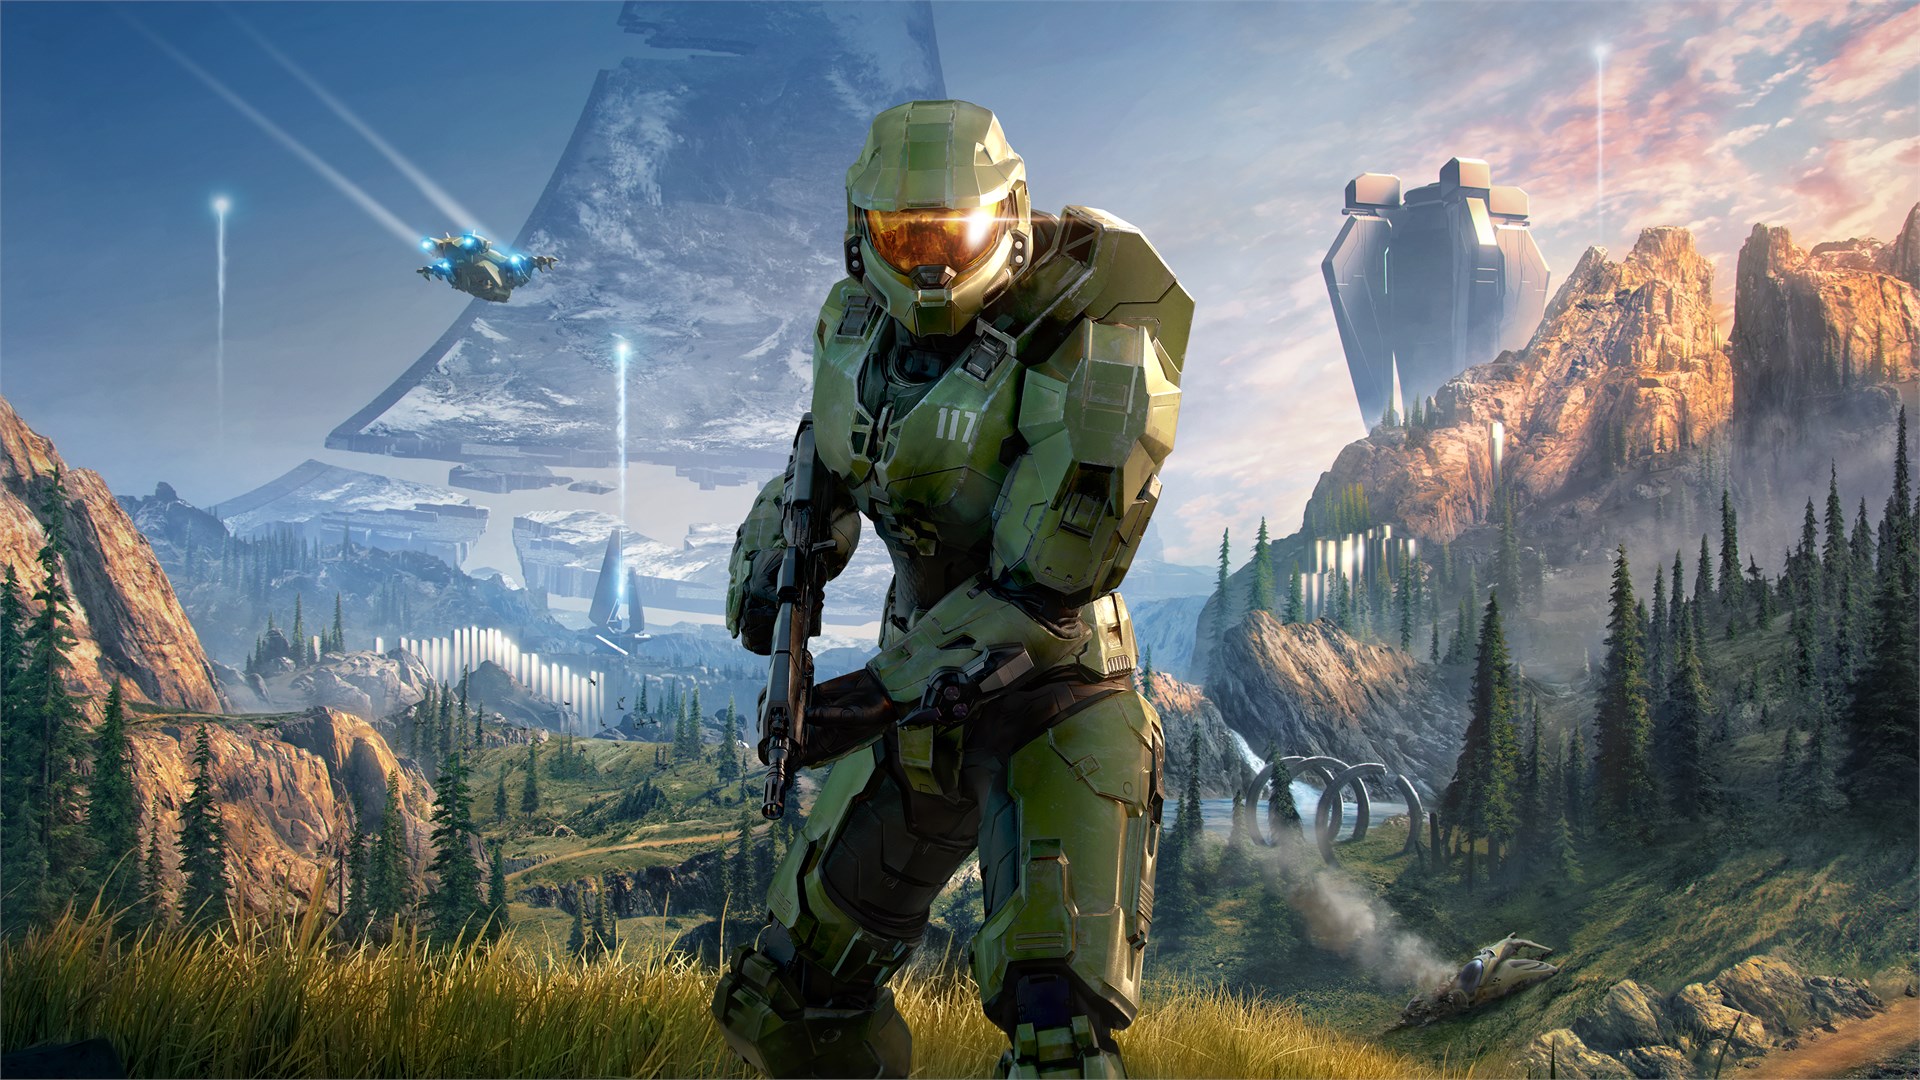 Video For Halo Infinite Multiplayer Beta Is Now Available For PC, Xbox One, And Xbox Series X|S